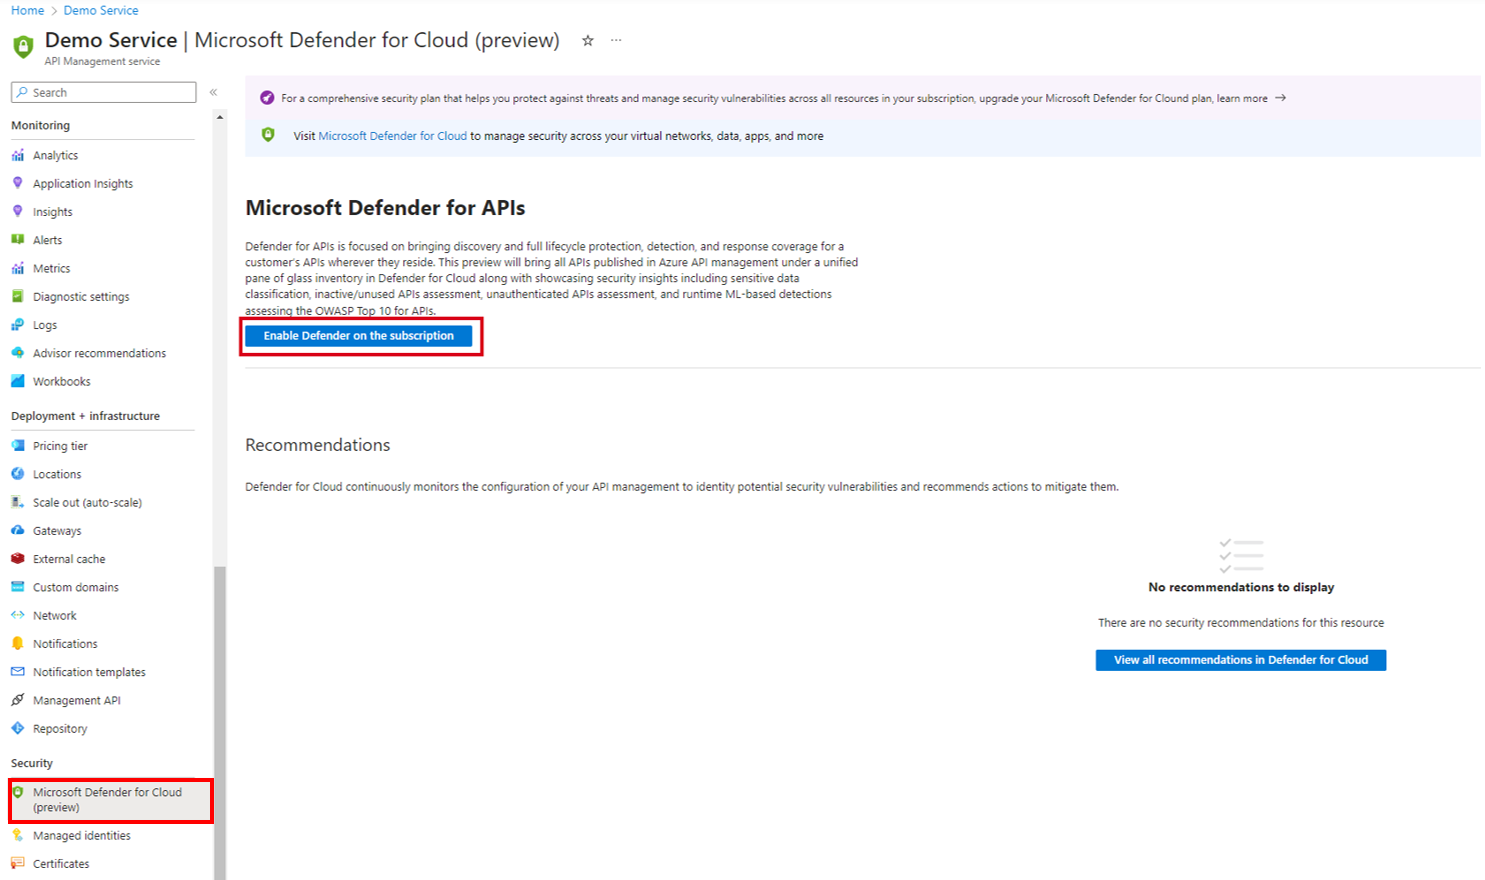 Screenshot showing how to enable Defender for APIs in the portal.